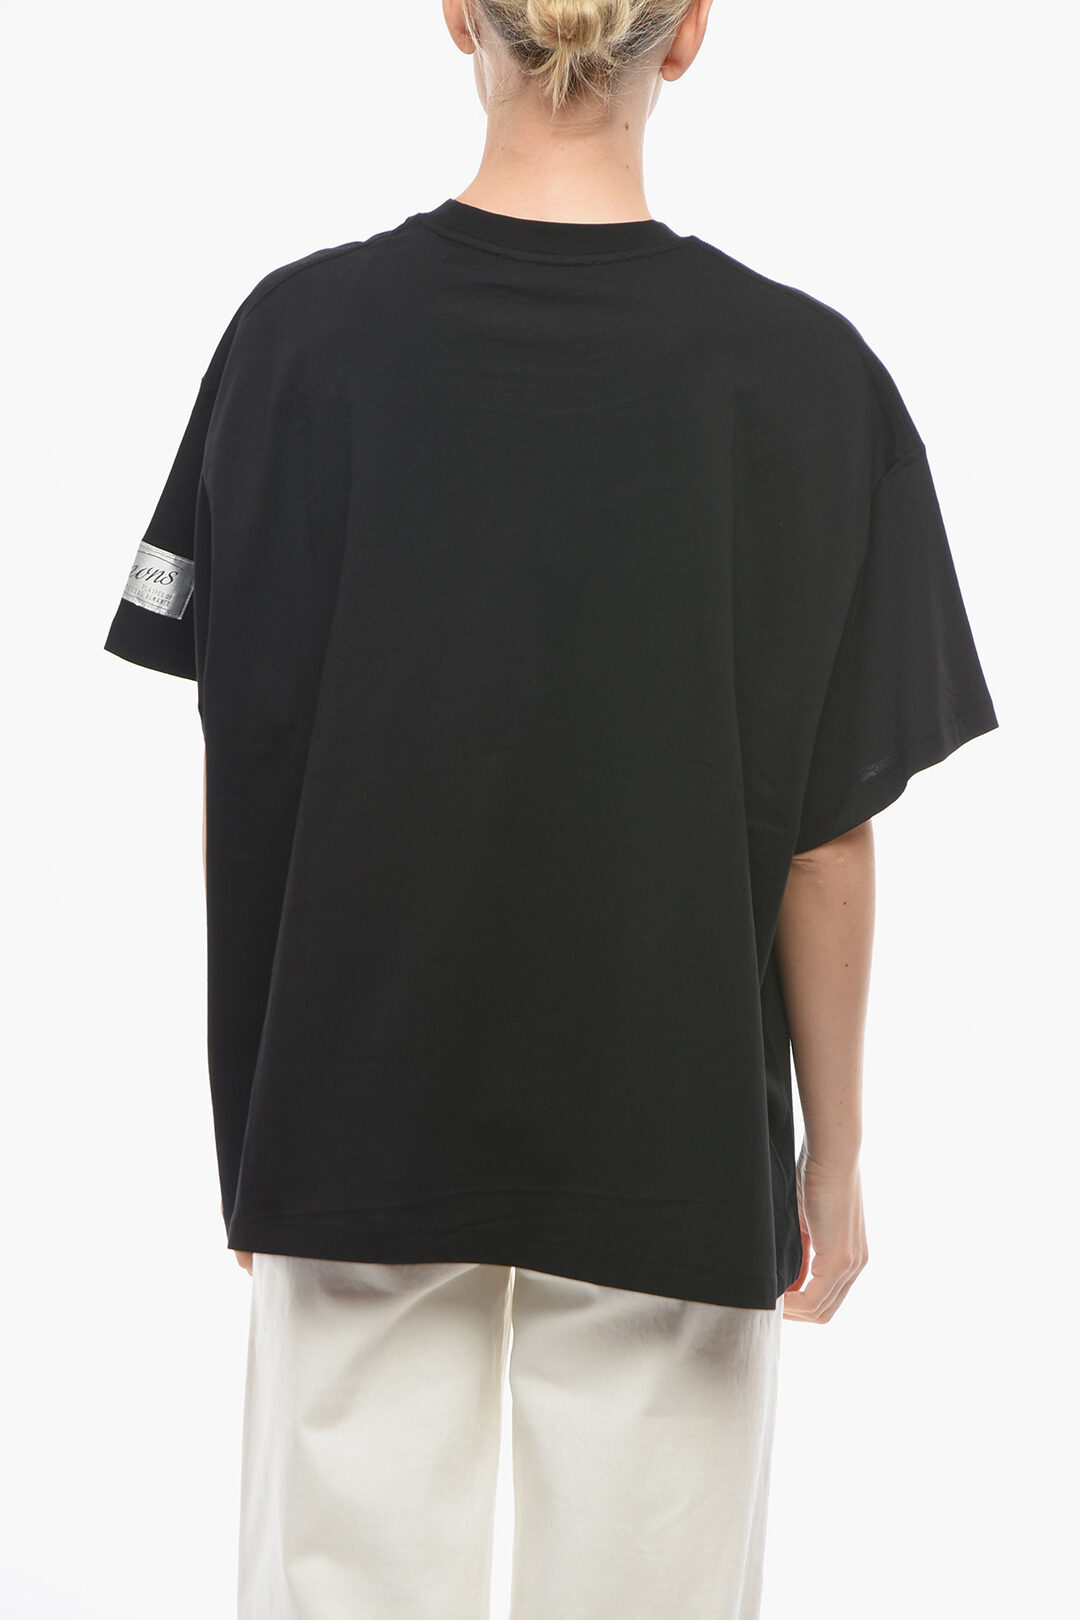 Oversized SREAPERS T-shirt with Multicolored Print